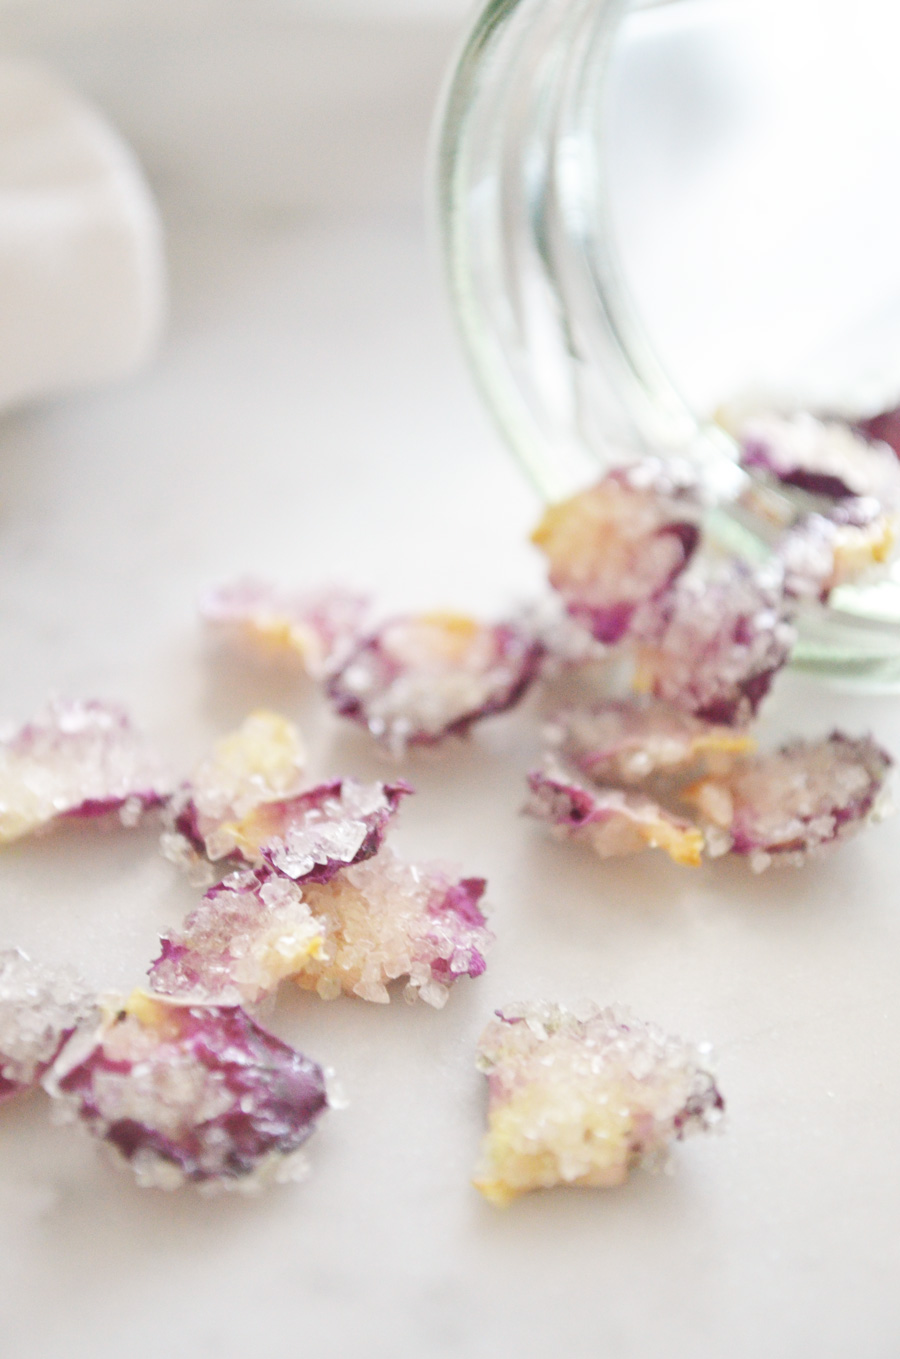 How to make vegan candied rose petals